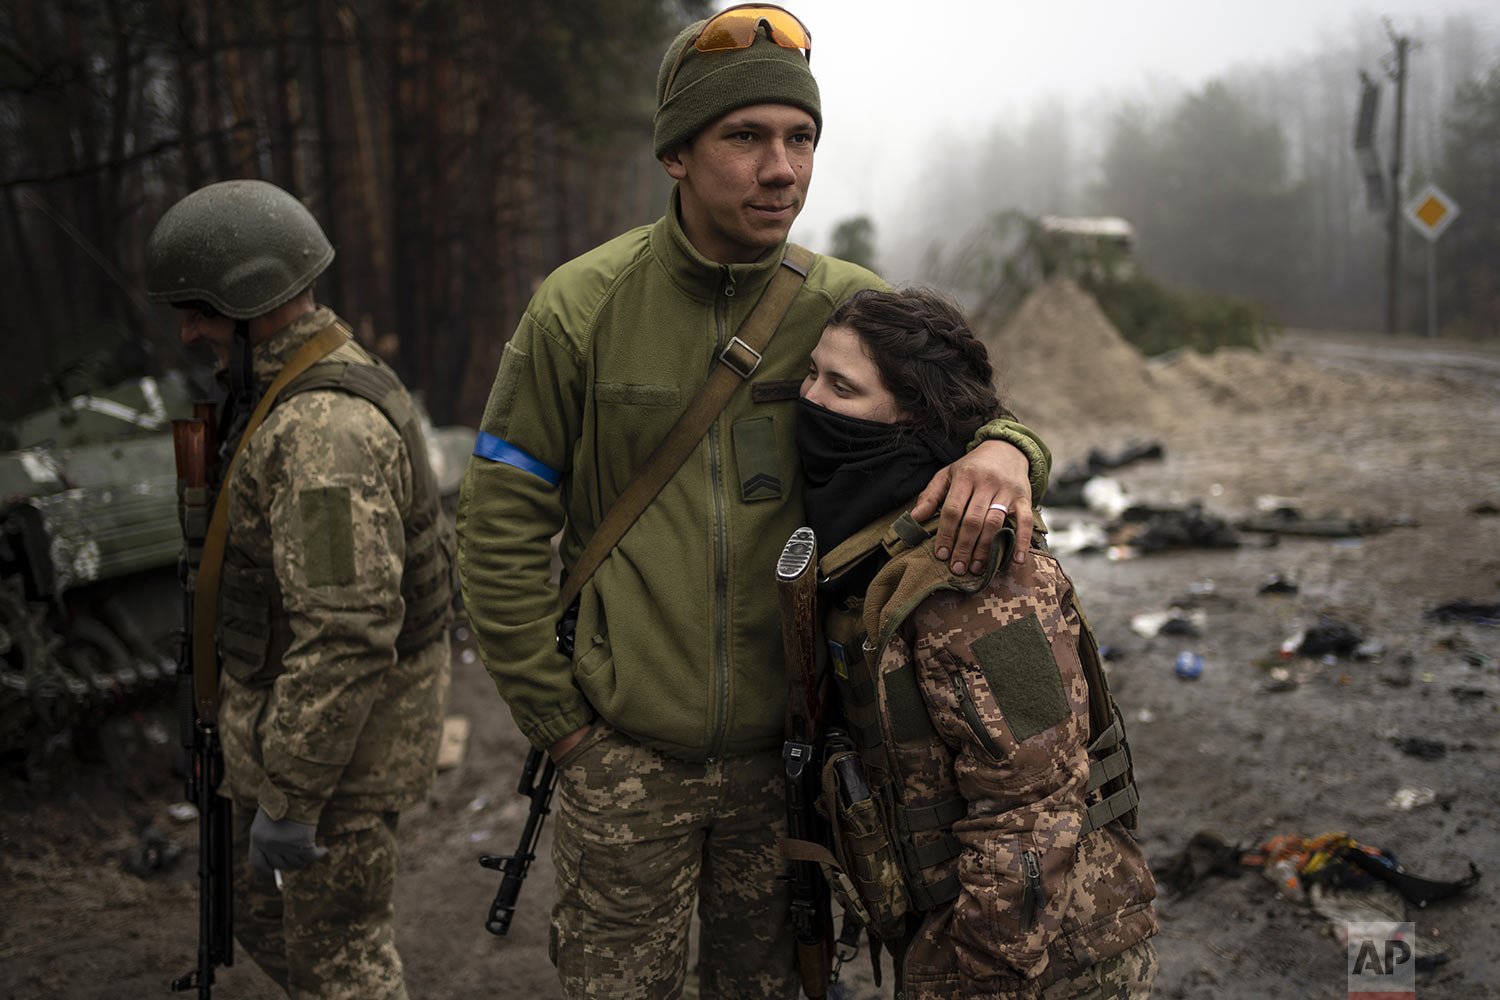  Ukrainian army soldiers, Igor, 23, embraces his wife Dasha, 22, after a military sweep to search for possible remnants of Russian troops after their withdrawal from villages on the outskirts of Kyiv, Ukraine, Friday, April 1, 2022. (AP Photo/Rodrigo